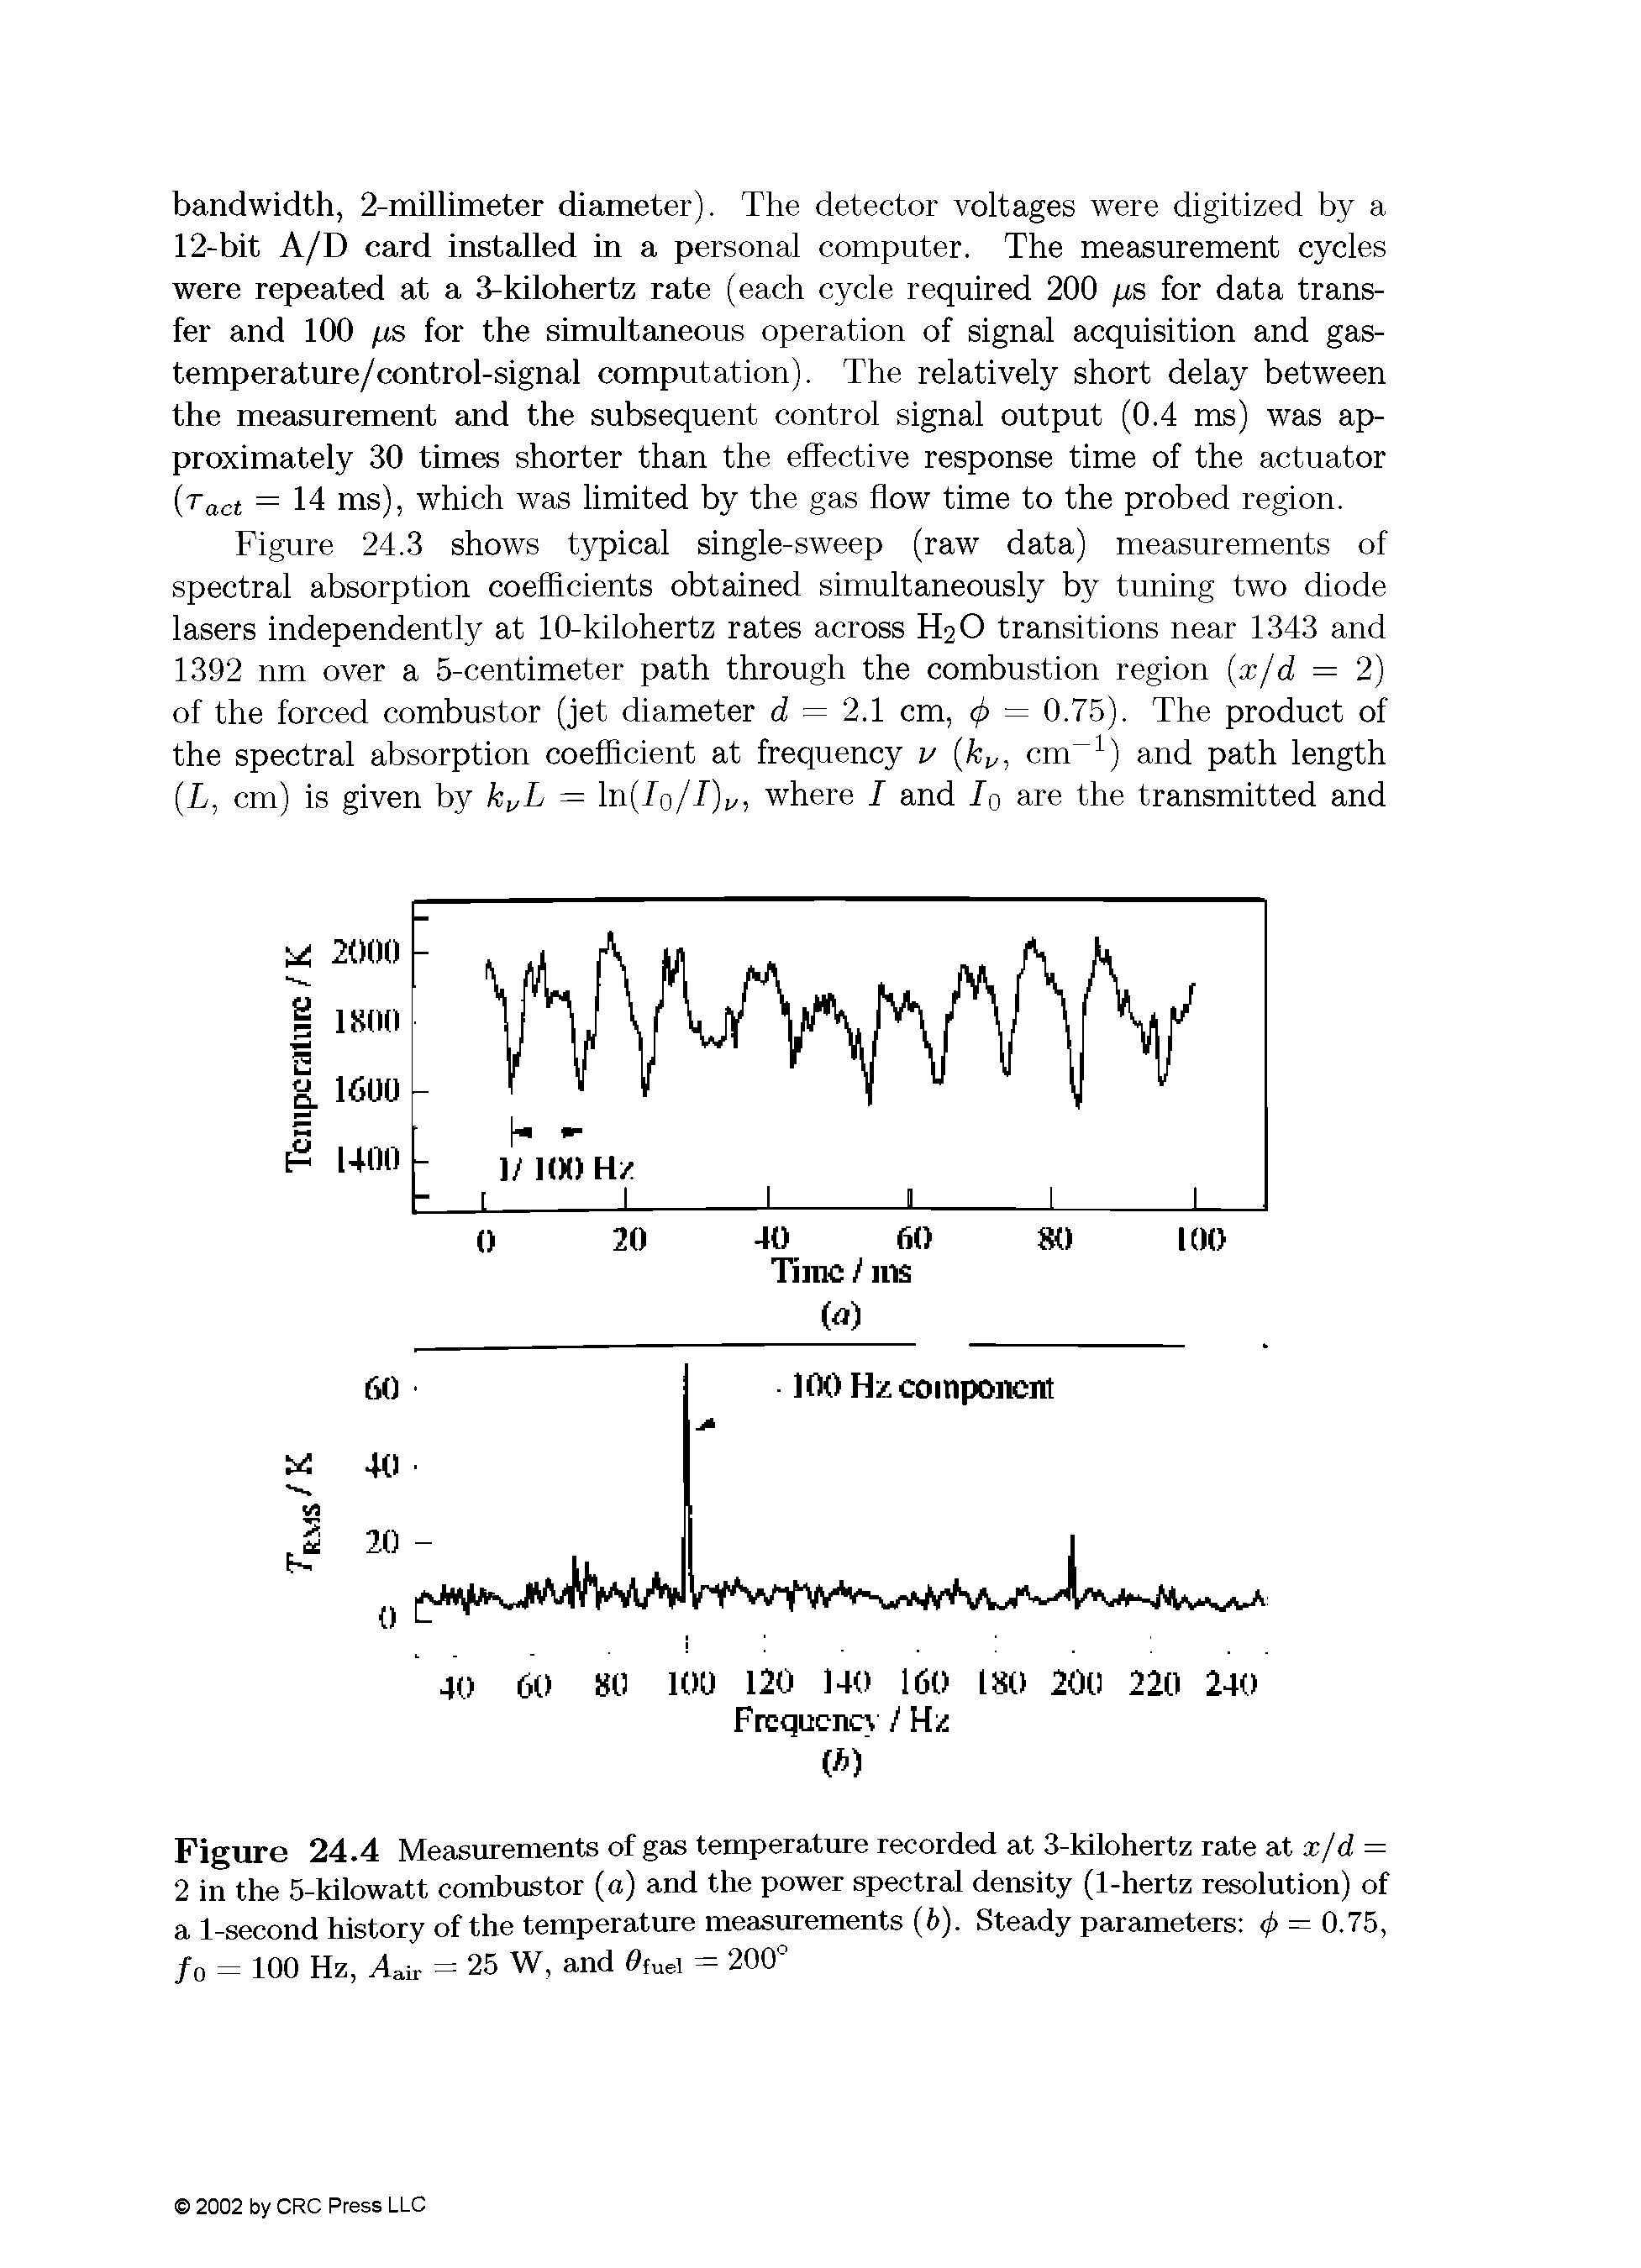 Figure 24.4 Measurements of gas temperature recorded at 3-kilohertz rate at x/d = 2 in the 5-kilowatt combustor (a) and the power spectral density (1-hertz resolution) of a 1-second history of the temperature measurements (6). Steady parameters </> = 0.75, fo = 100 Hz, Aair = 25 W, and 6 tuei = 200°...